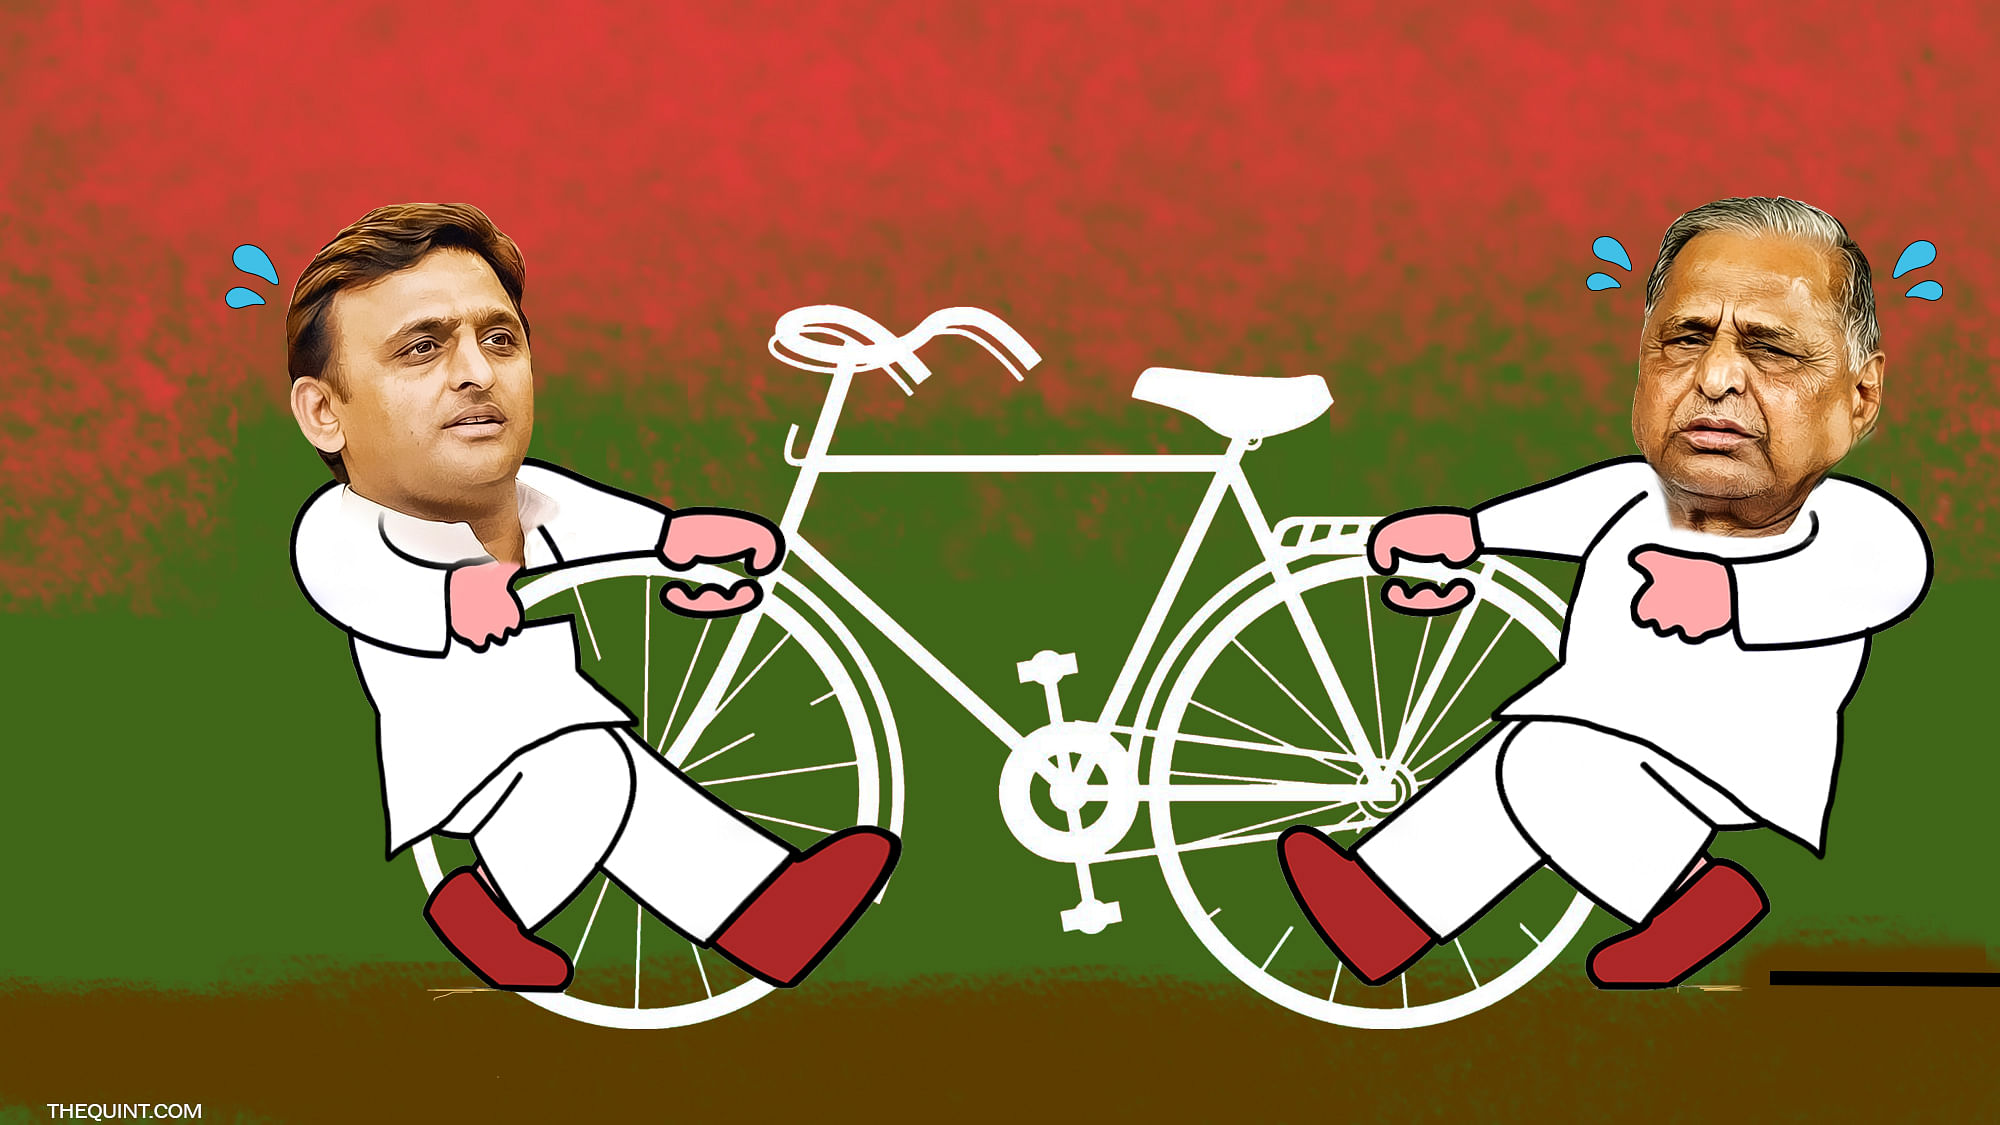 

The Election Commission has initiated the process for the two warring factions of the Samajwadi Party to claim their party’s “cycle” symbol. (Photo: Rhythum Seth/<b>The Quint</b>)